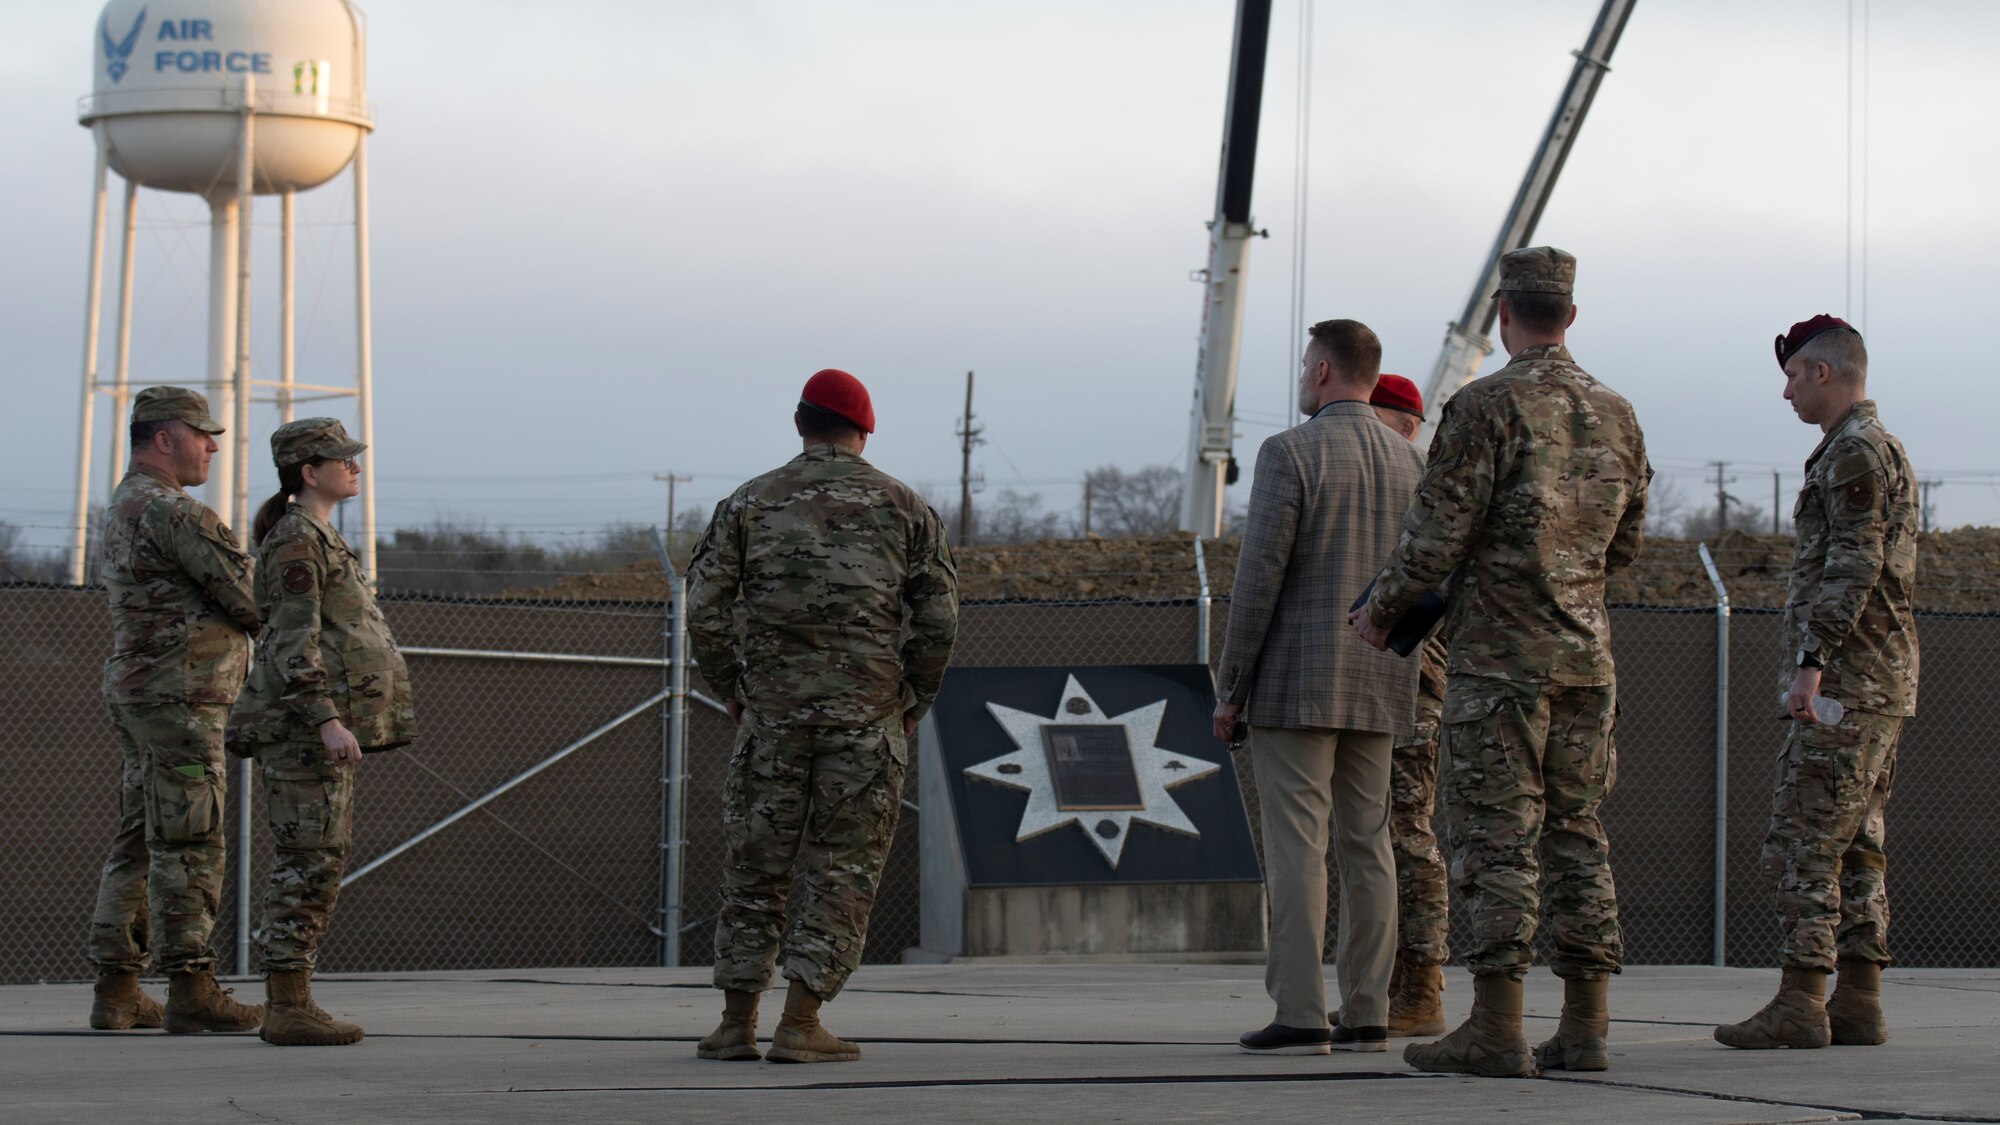 U.S. Air Force Maj. Gen. Matthew Davidson (center), Air Force Special Operations Command director of operations, receives a tour of the Special Warfare Training Wing memorial site overlooking the construction site of a new, $66.6M aquatics training facility that will accommodate training for over 3,000 Air Force Special Warfare trainees annually when complete on Joint Base San Antonio-Chapman Training Annex, Texas, Mar. 17, 2022. Maj. Gen. Davidson visited the SWTW to observe Assessment and Selection and the SWTW pipelines that feed AFSOC career fields.